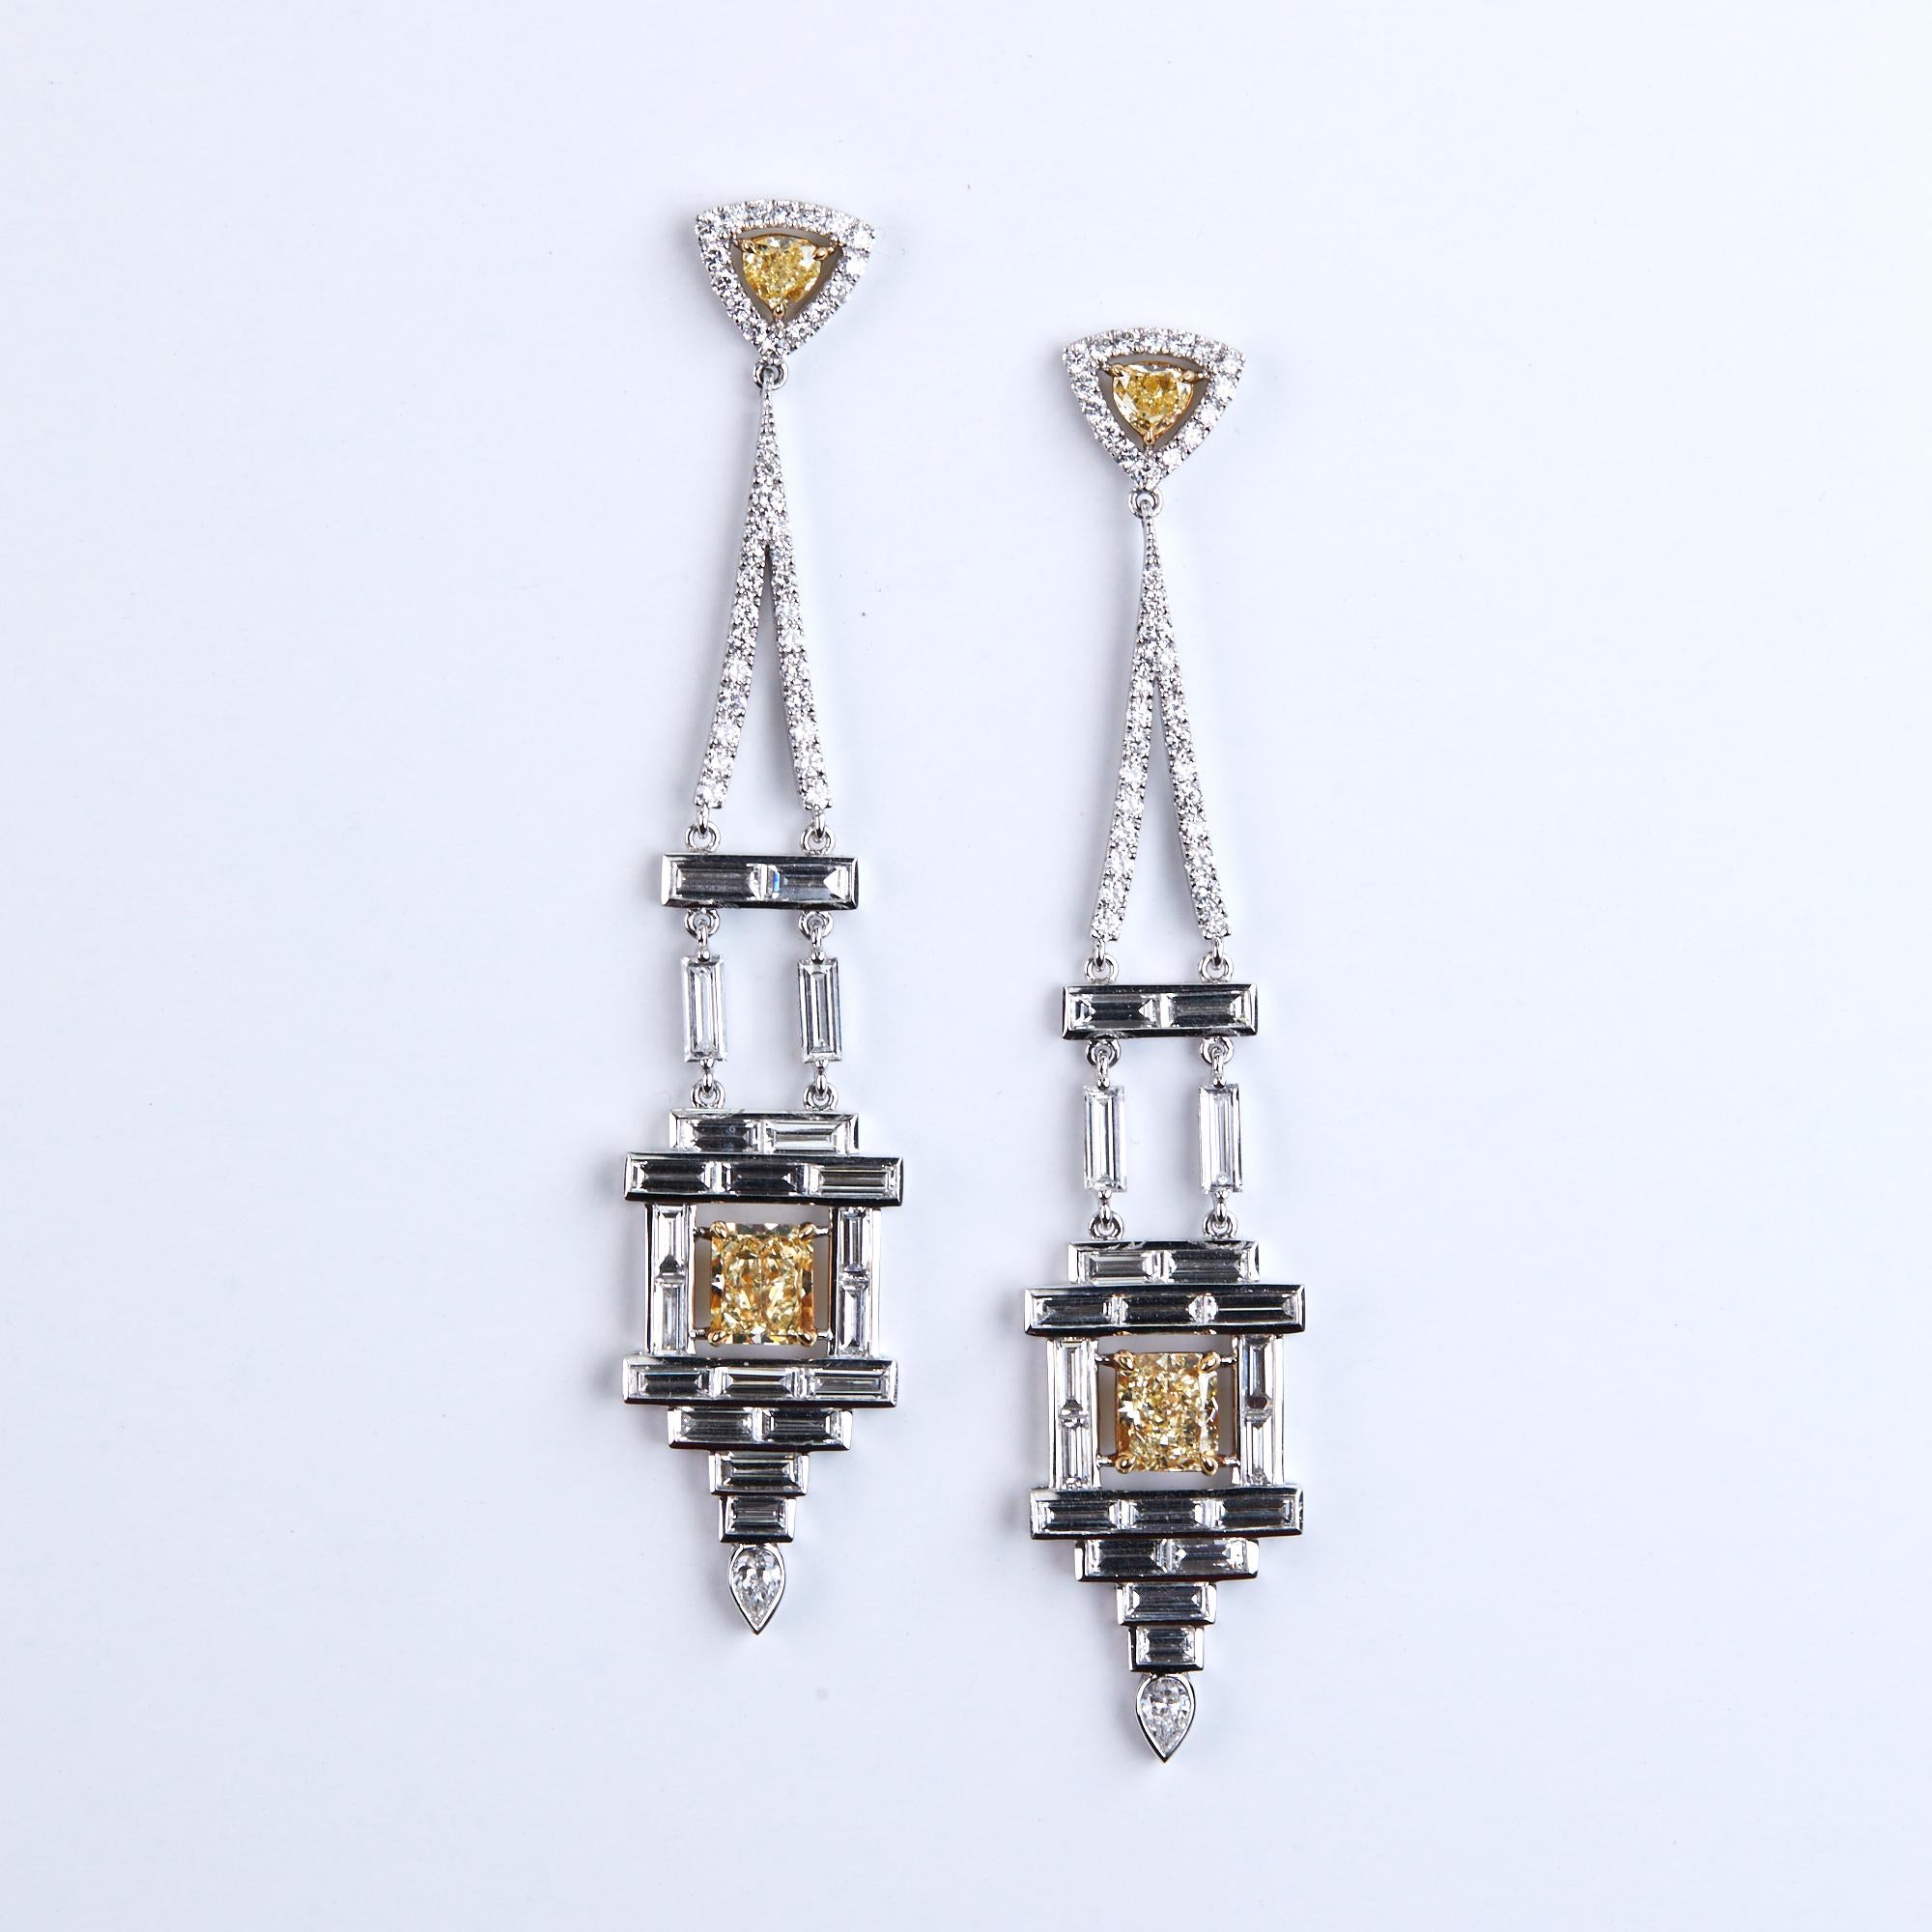 Art Deco Inspired Chandelier Diamond Earrings are a one of kind showpiece.  These Dangle Earrings boast 2 Fancy Yellow Radiant Cut GIA Certified Diamonds weighing 2.25 carats, 2 Fancy Yellow diamonds at the top weighing .59 carats.  40 Baguette Cut